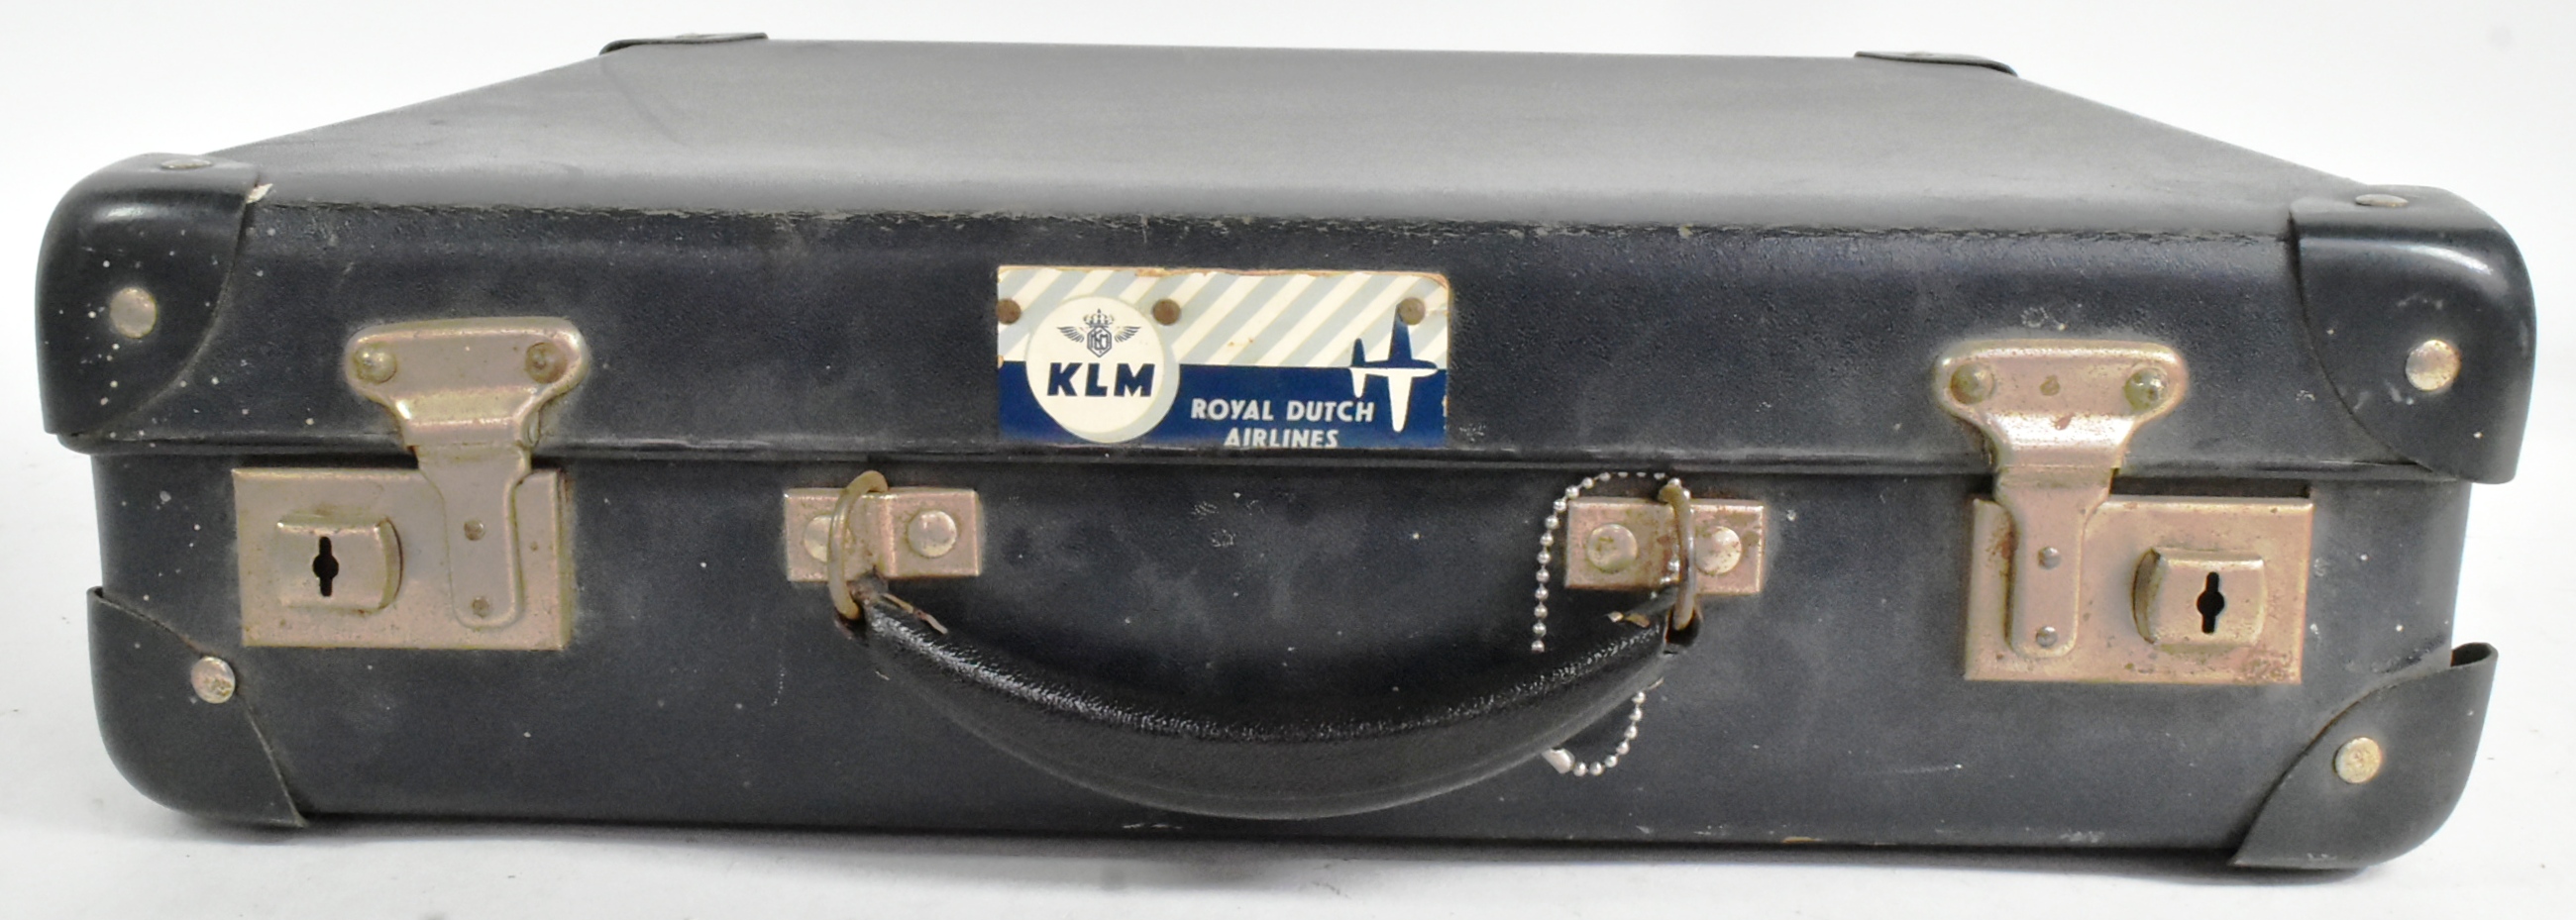 20TH CENTURY VINTAGE KLM ROYAL DUTCH AIRLINES SUITCASE - Image 2 of 4